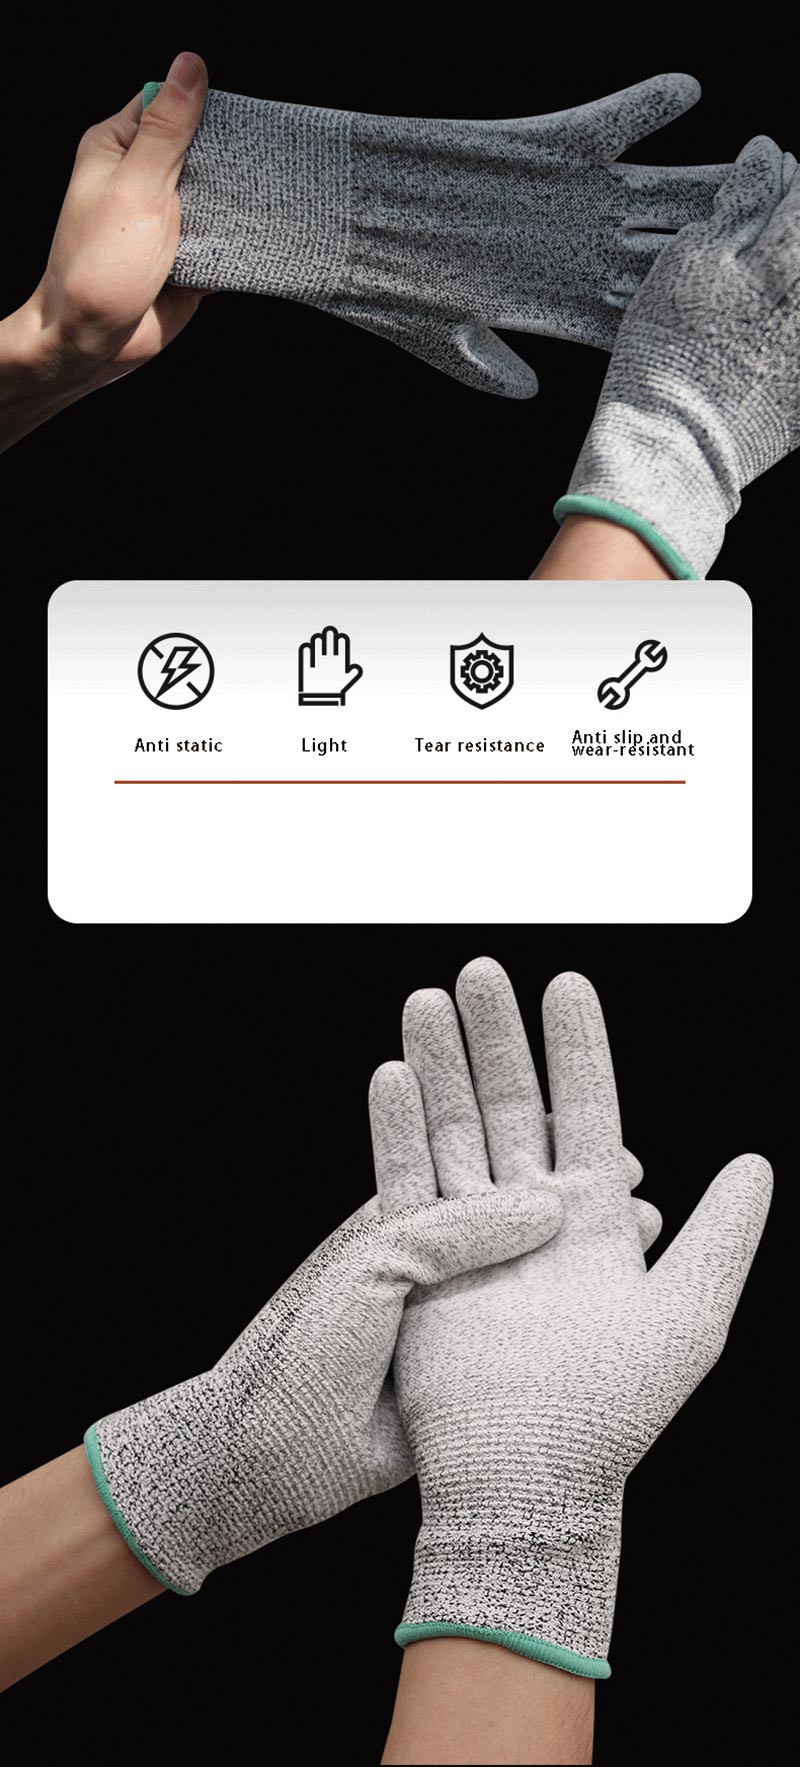 Application of Protective Gloves